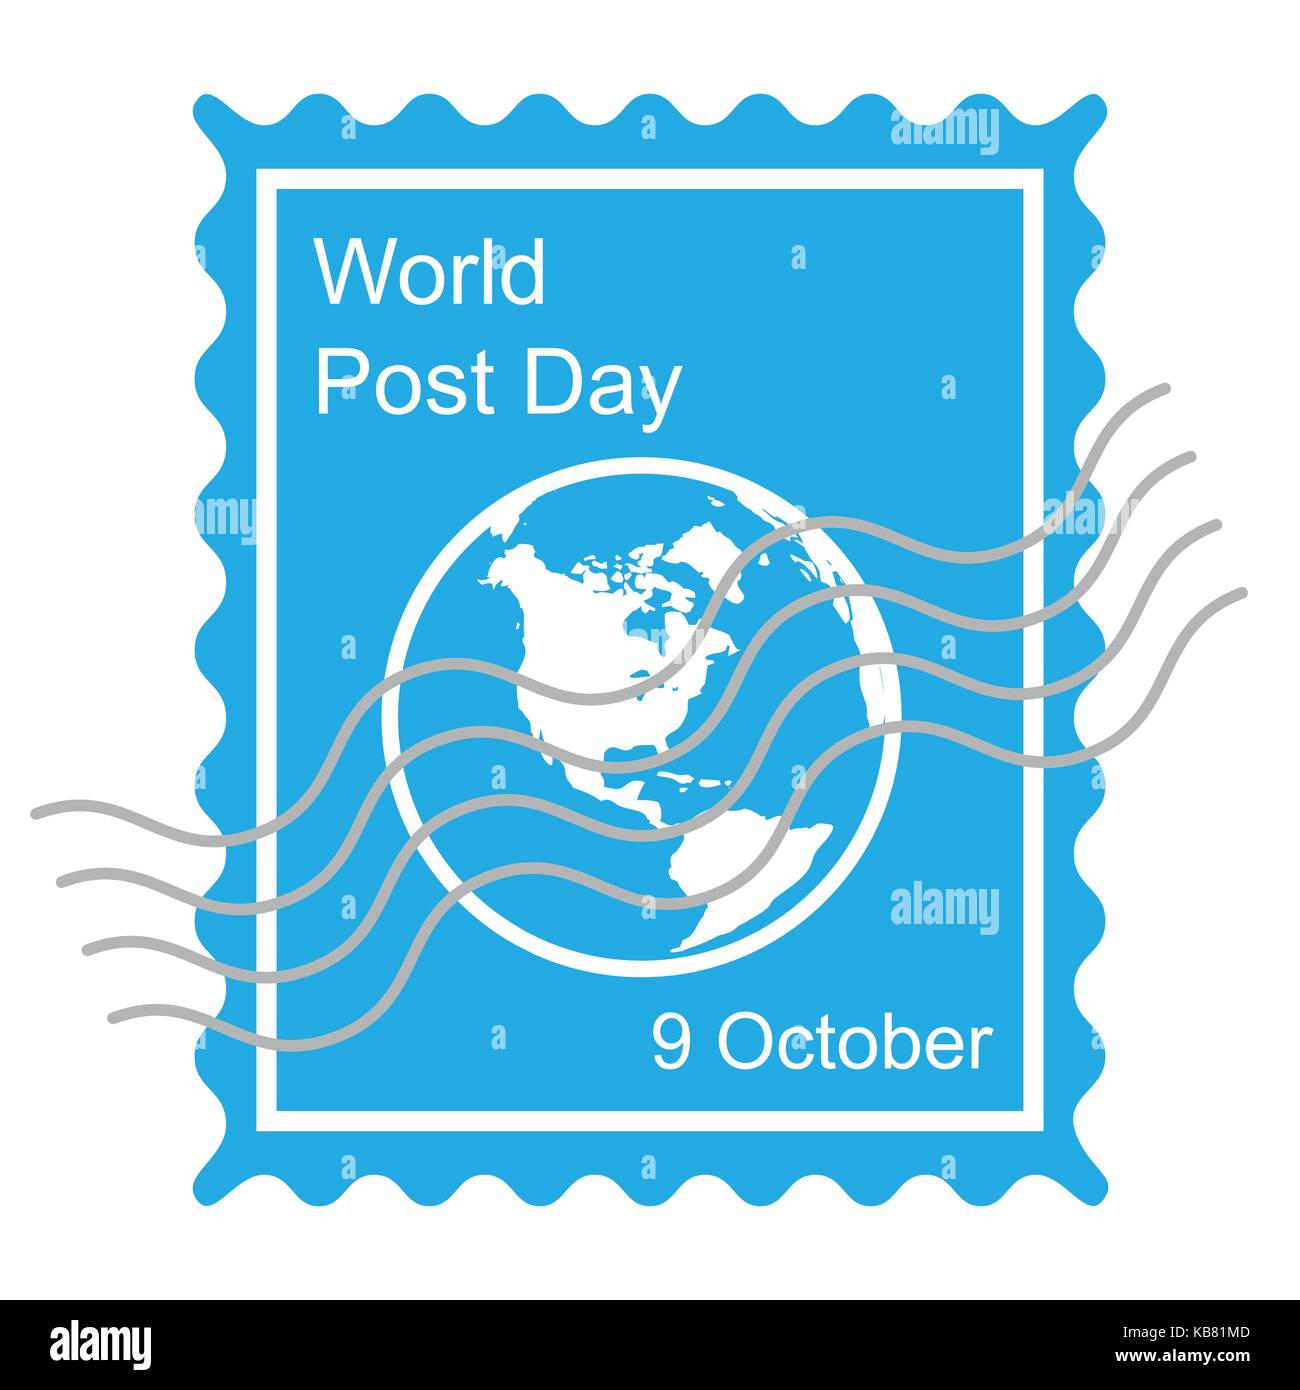 World post day in October with globe icon - vector illustration Stock Vector